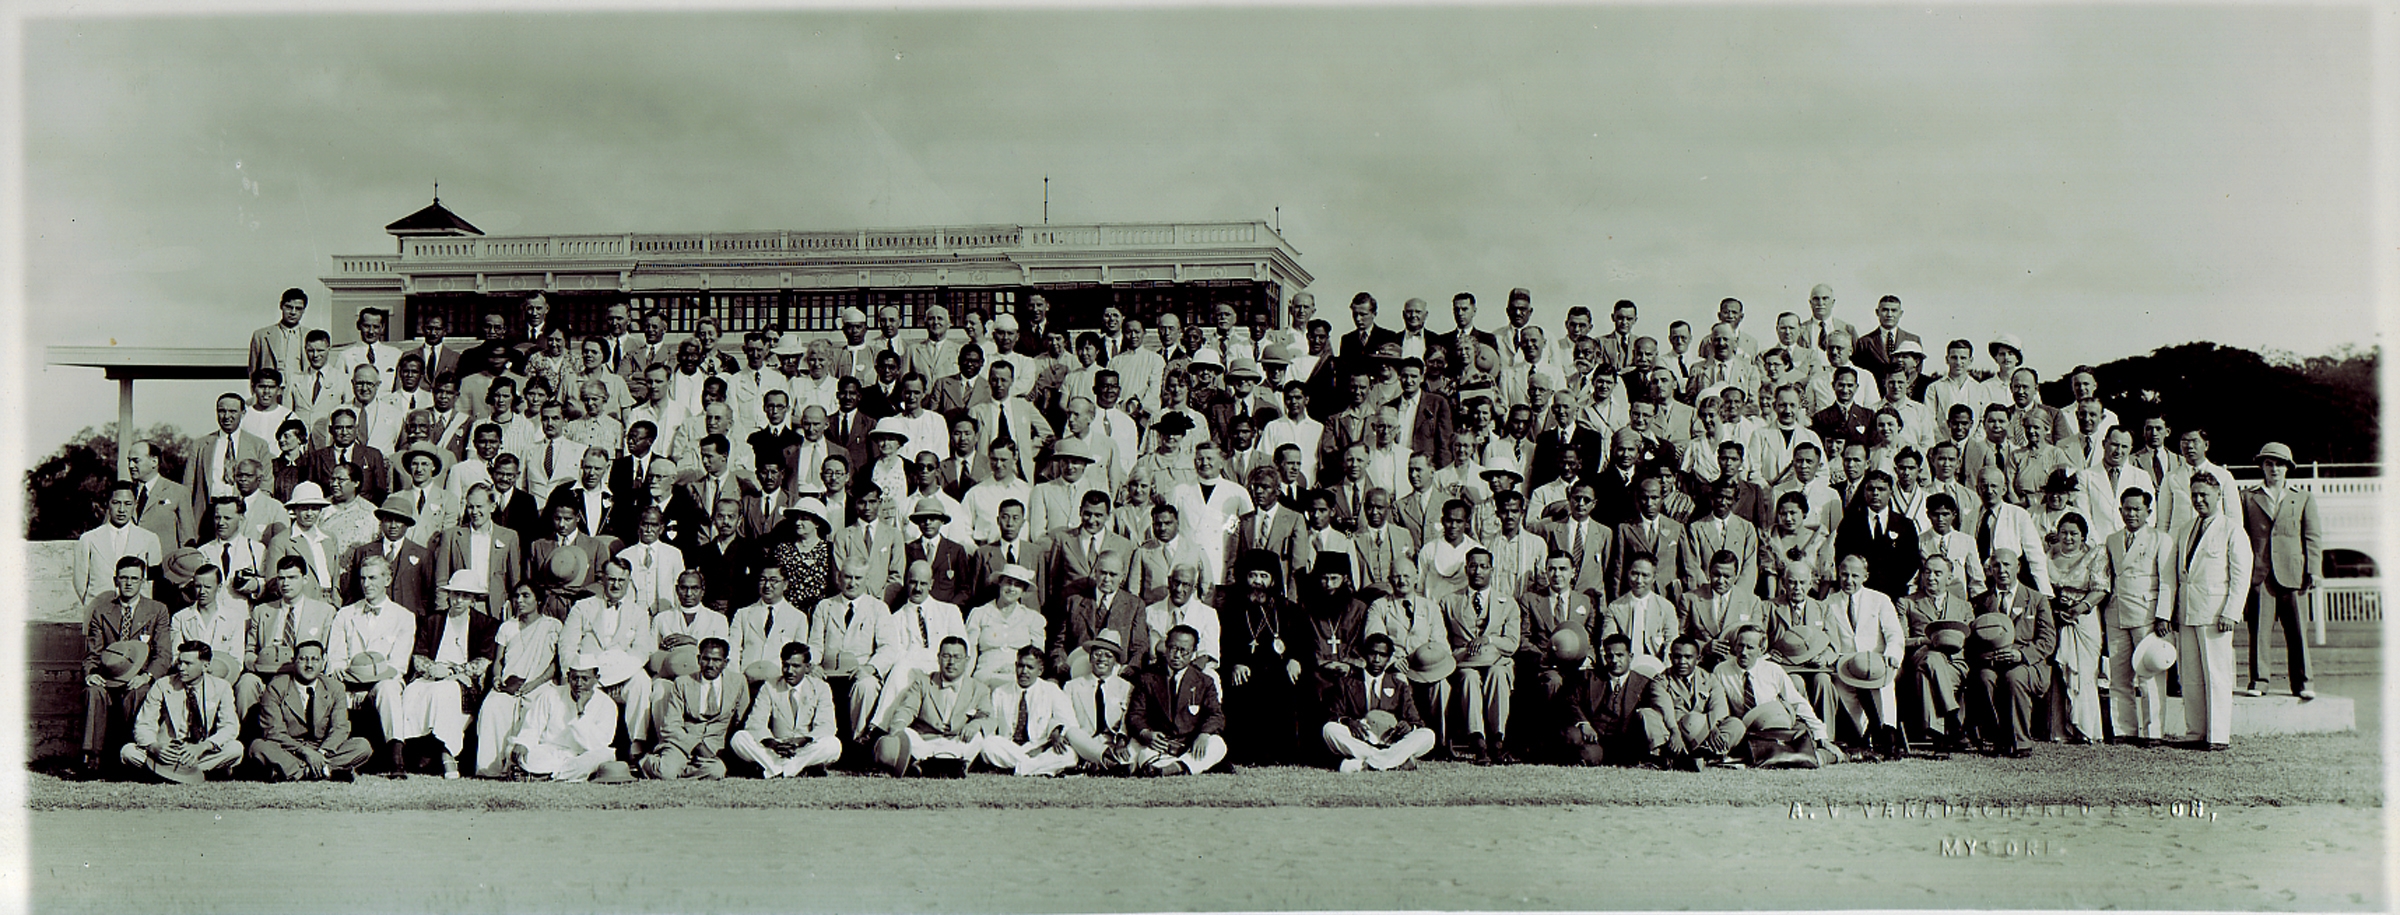 1937 Mysore, India - the 21st YMCA World Conference , and first outside Europe and North America